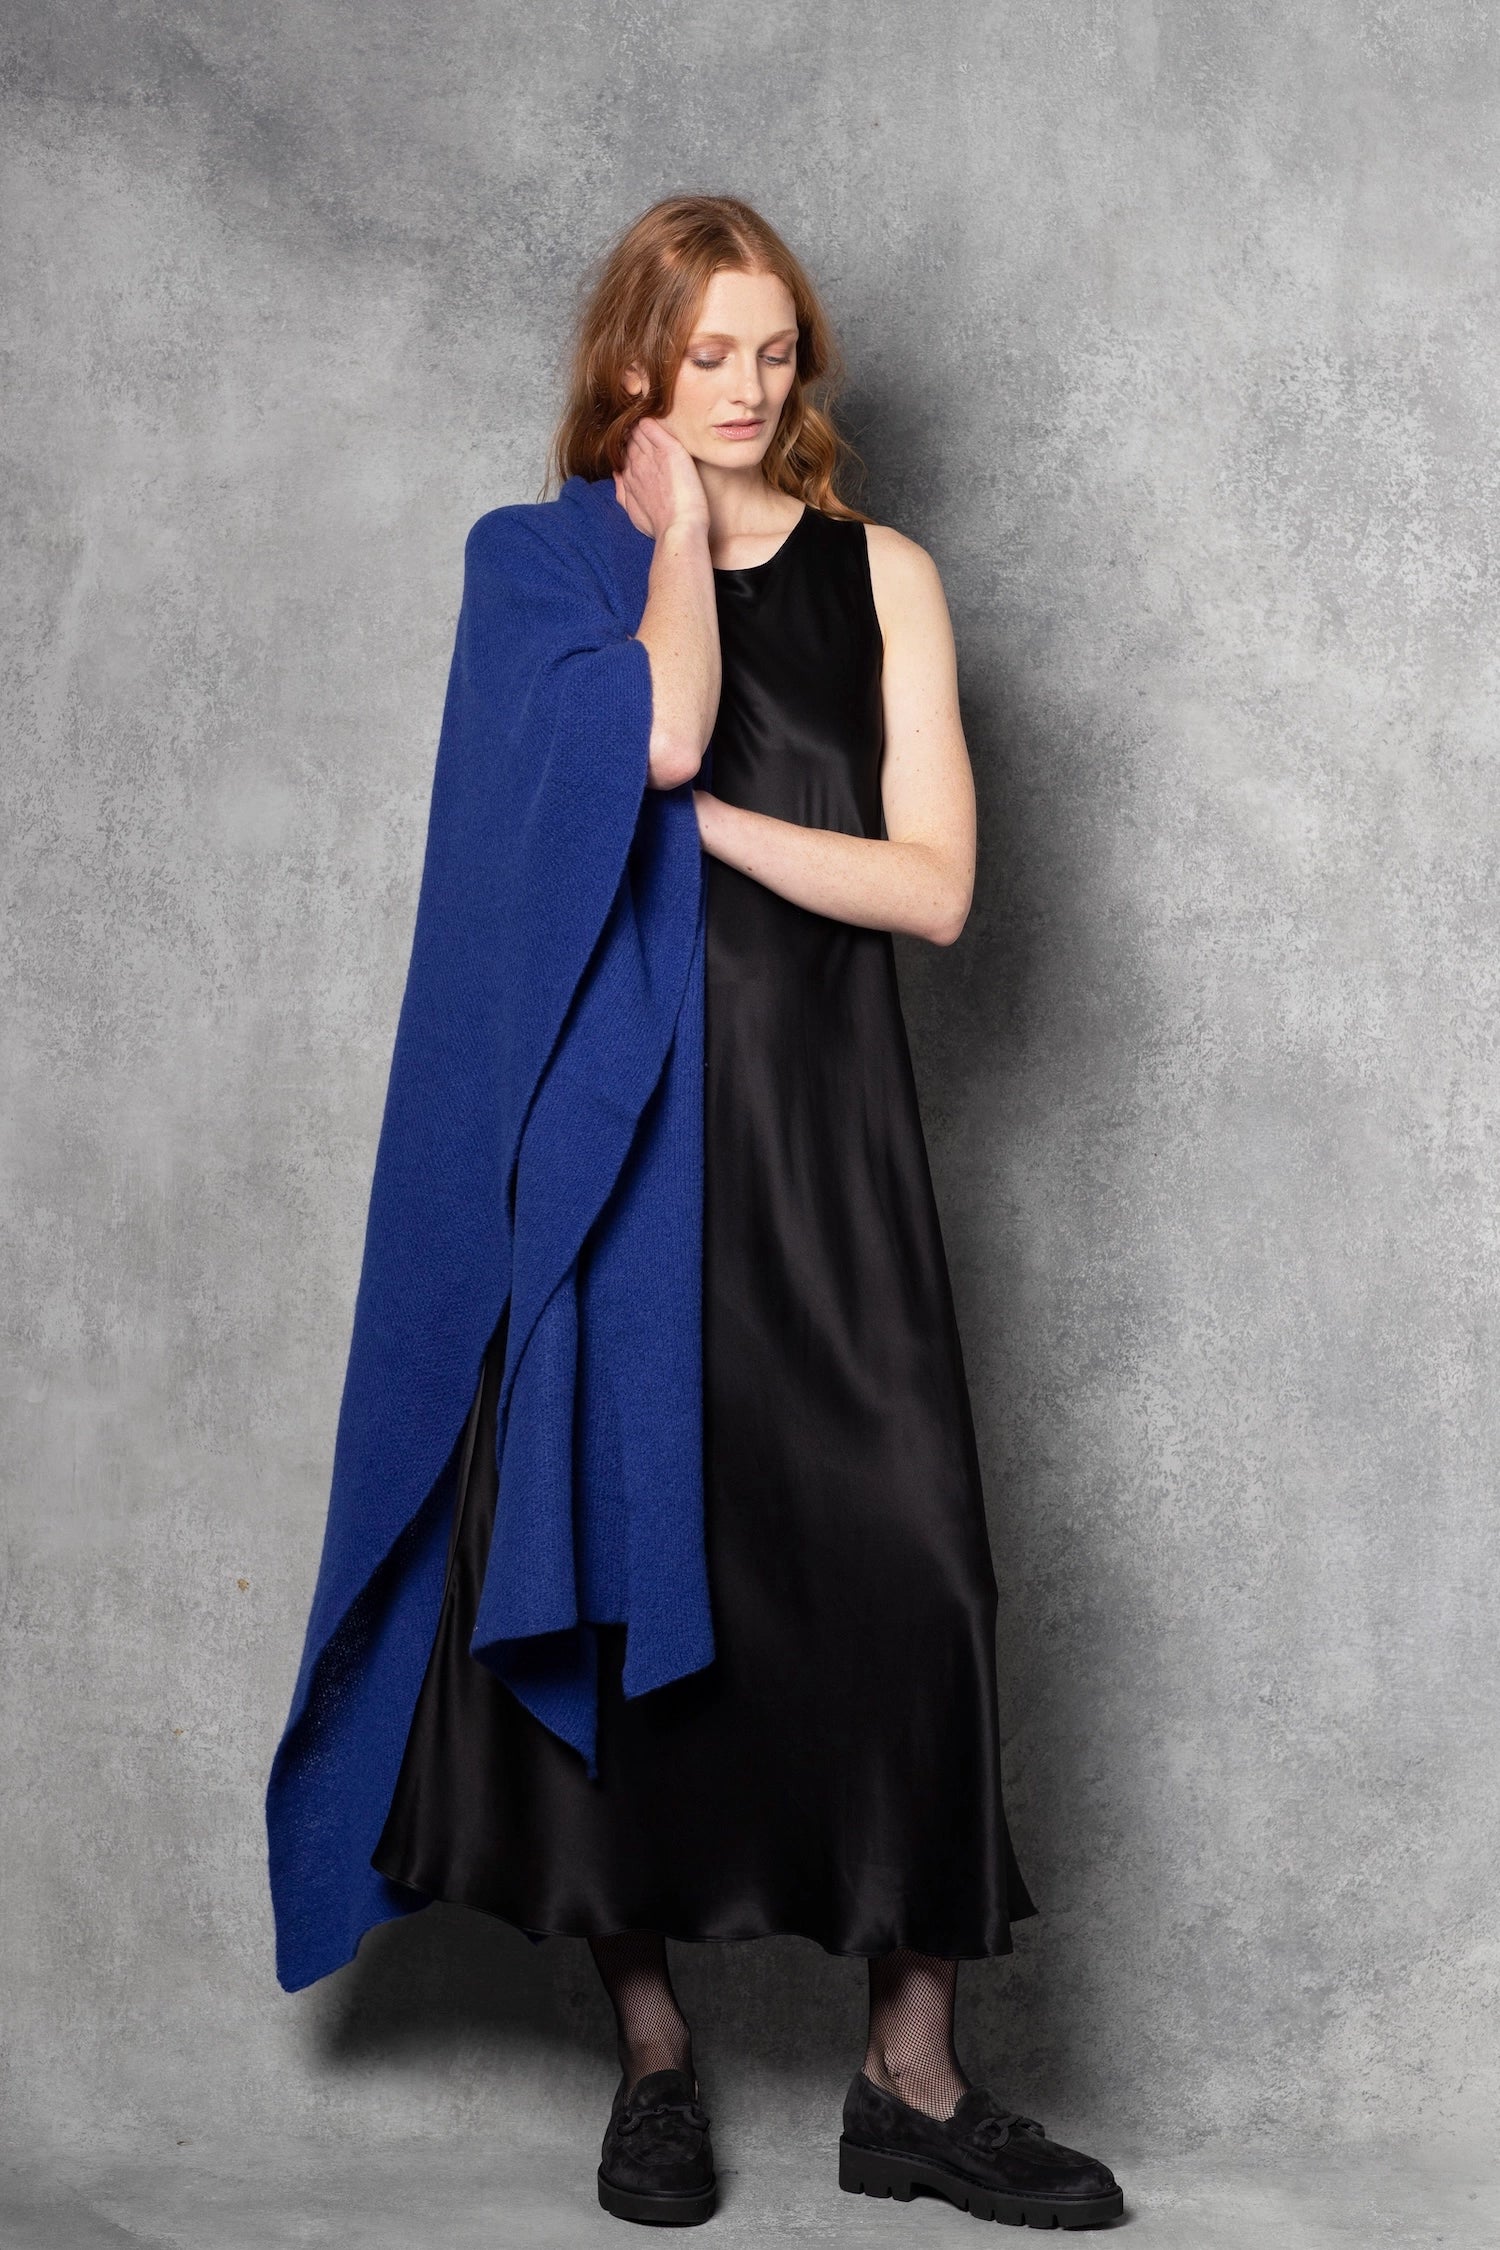 luxury large cashmere wrap in bright blue